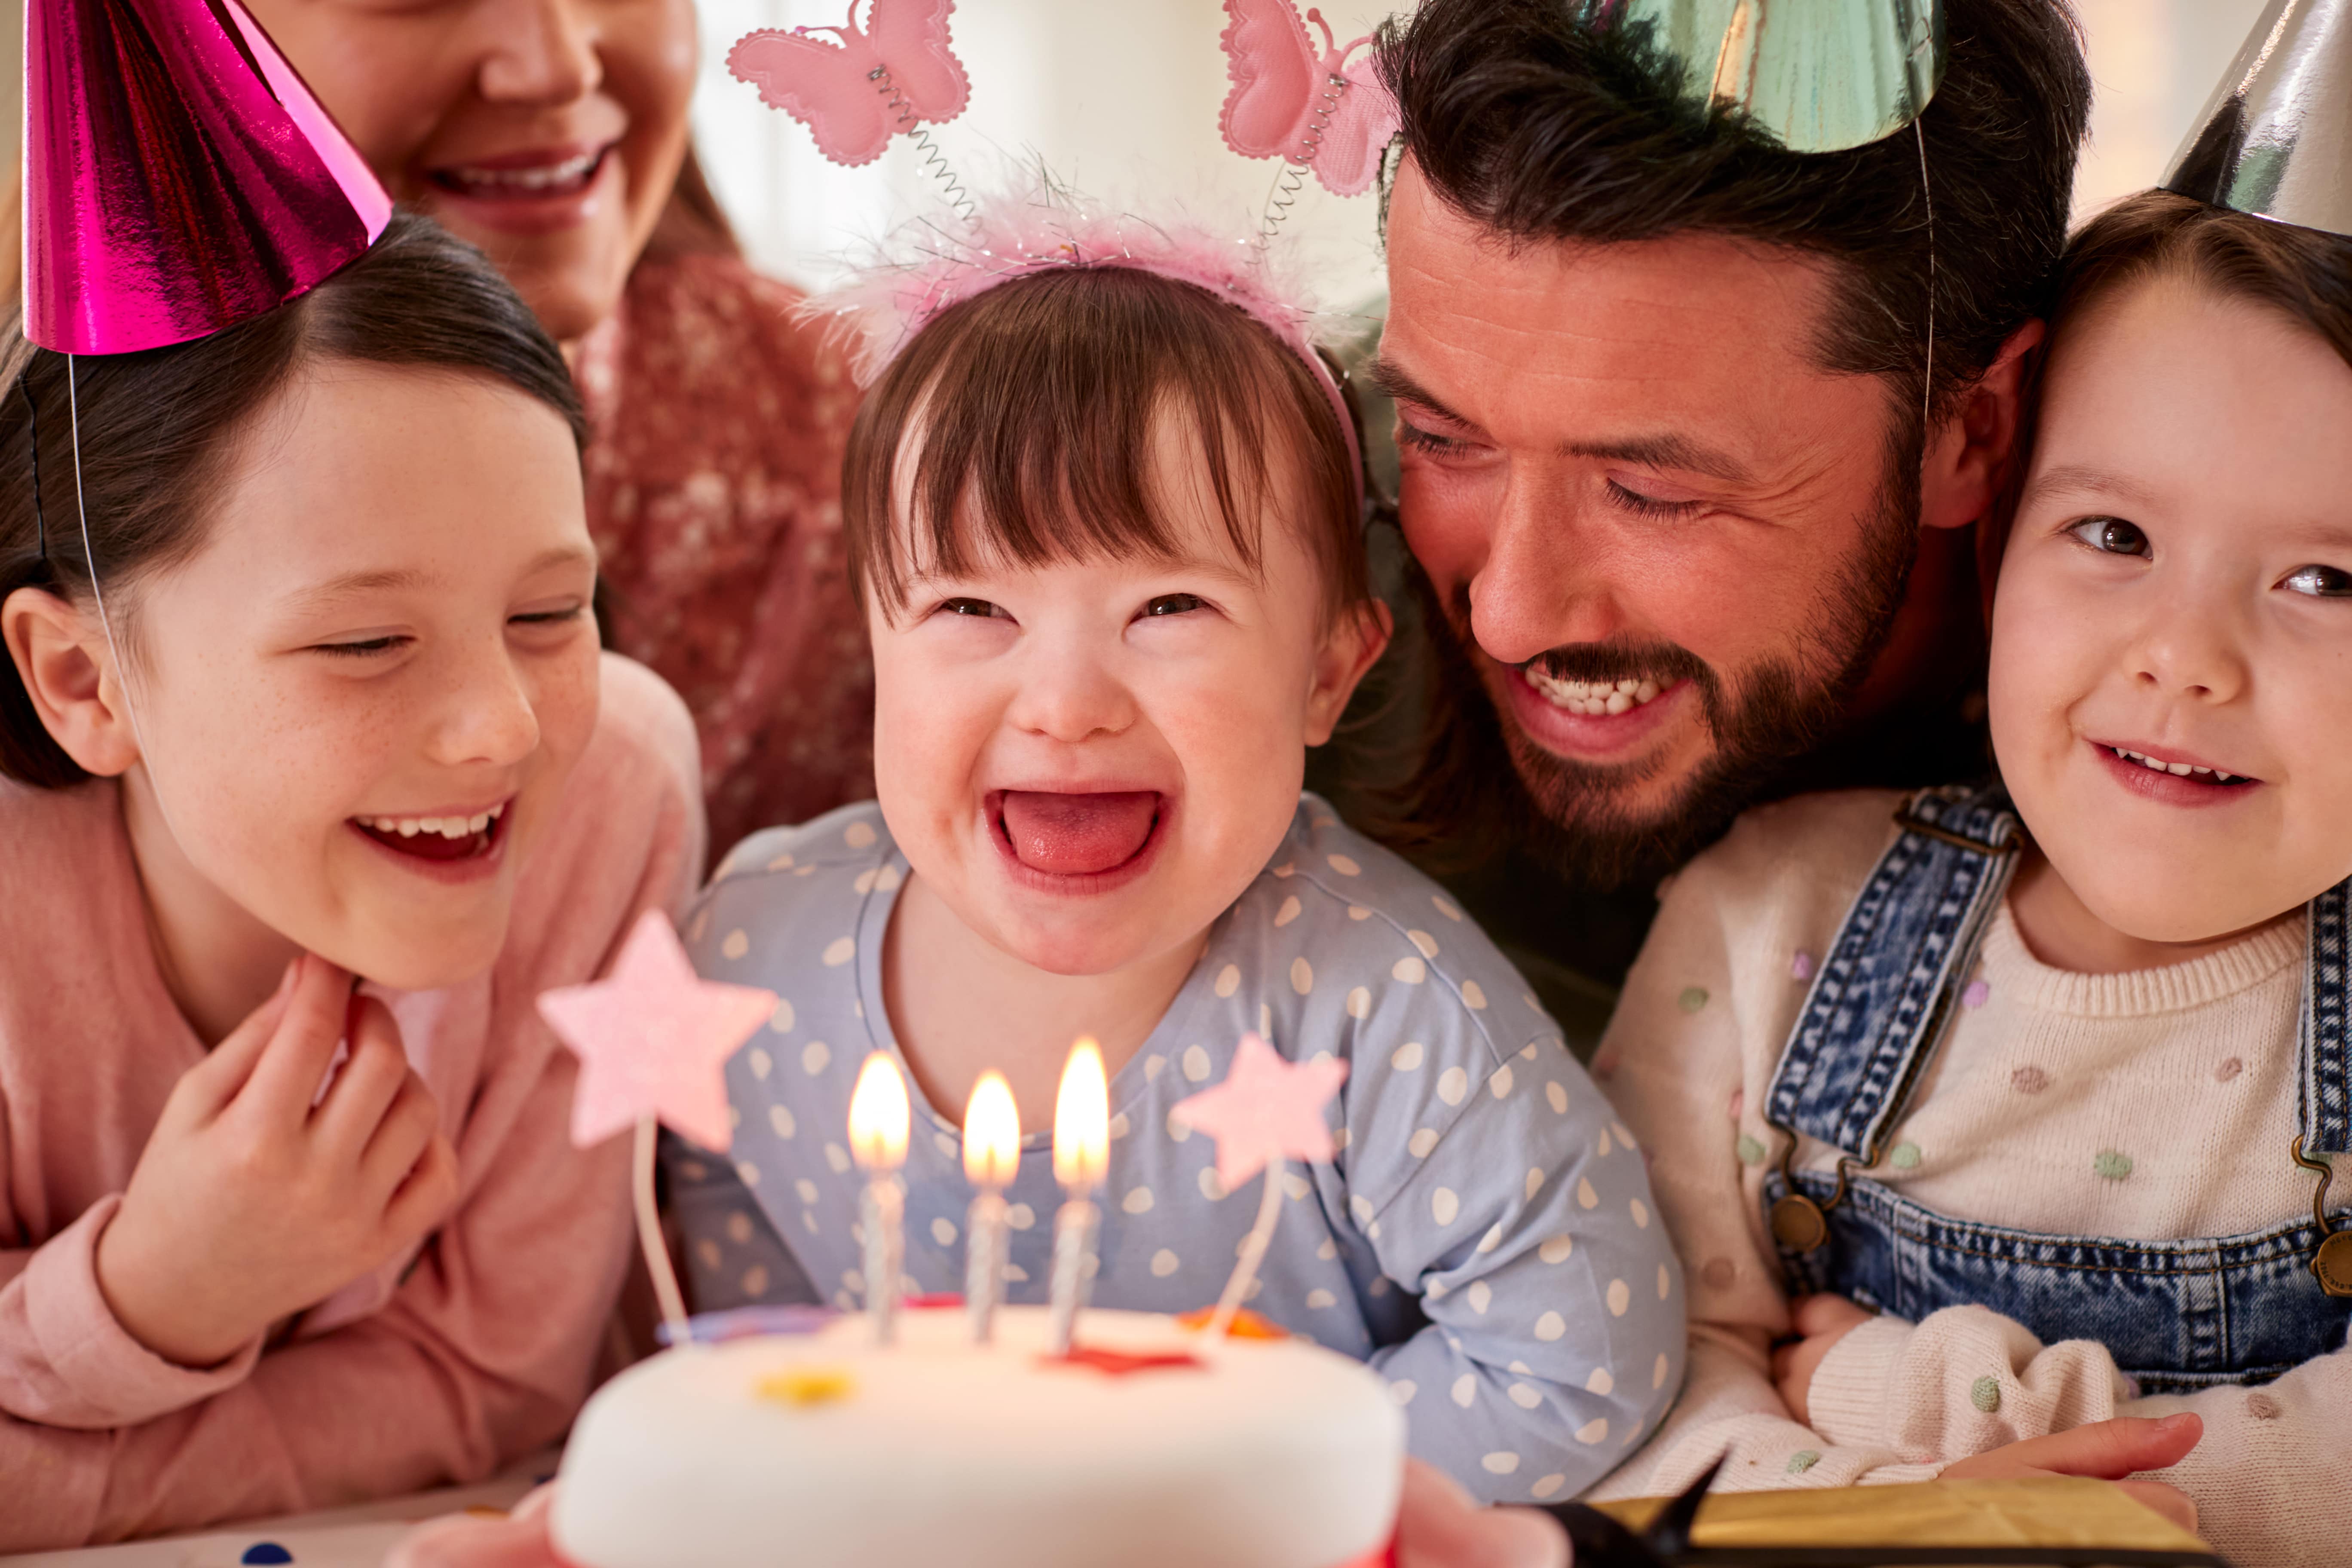 Family with down syndrome daughter celebrating first birthday party at home together